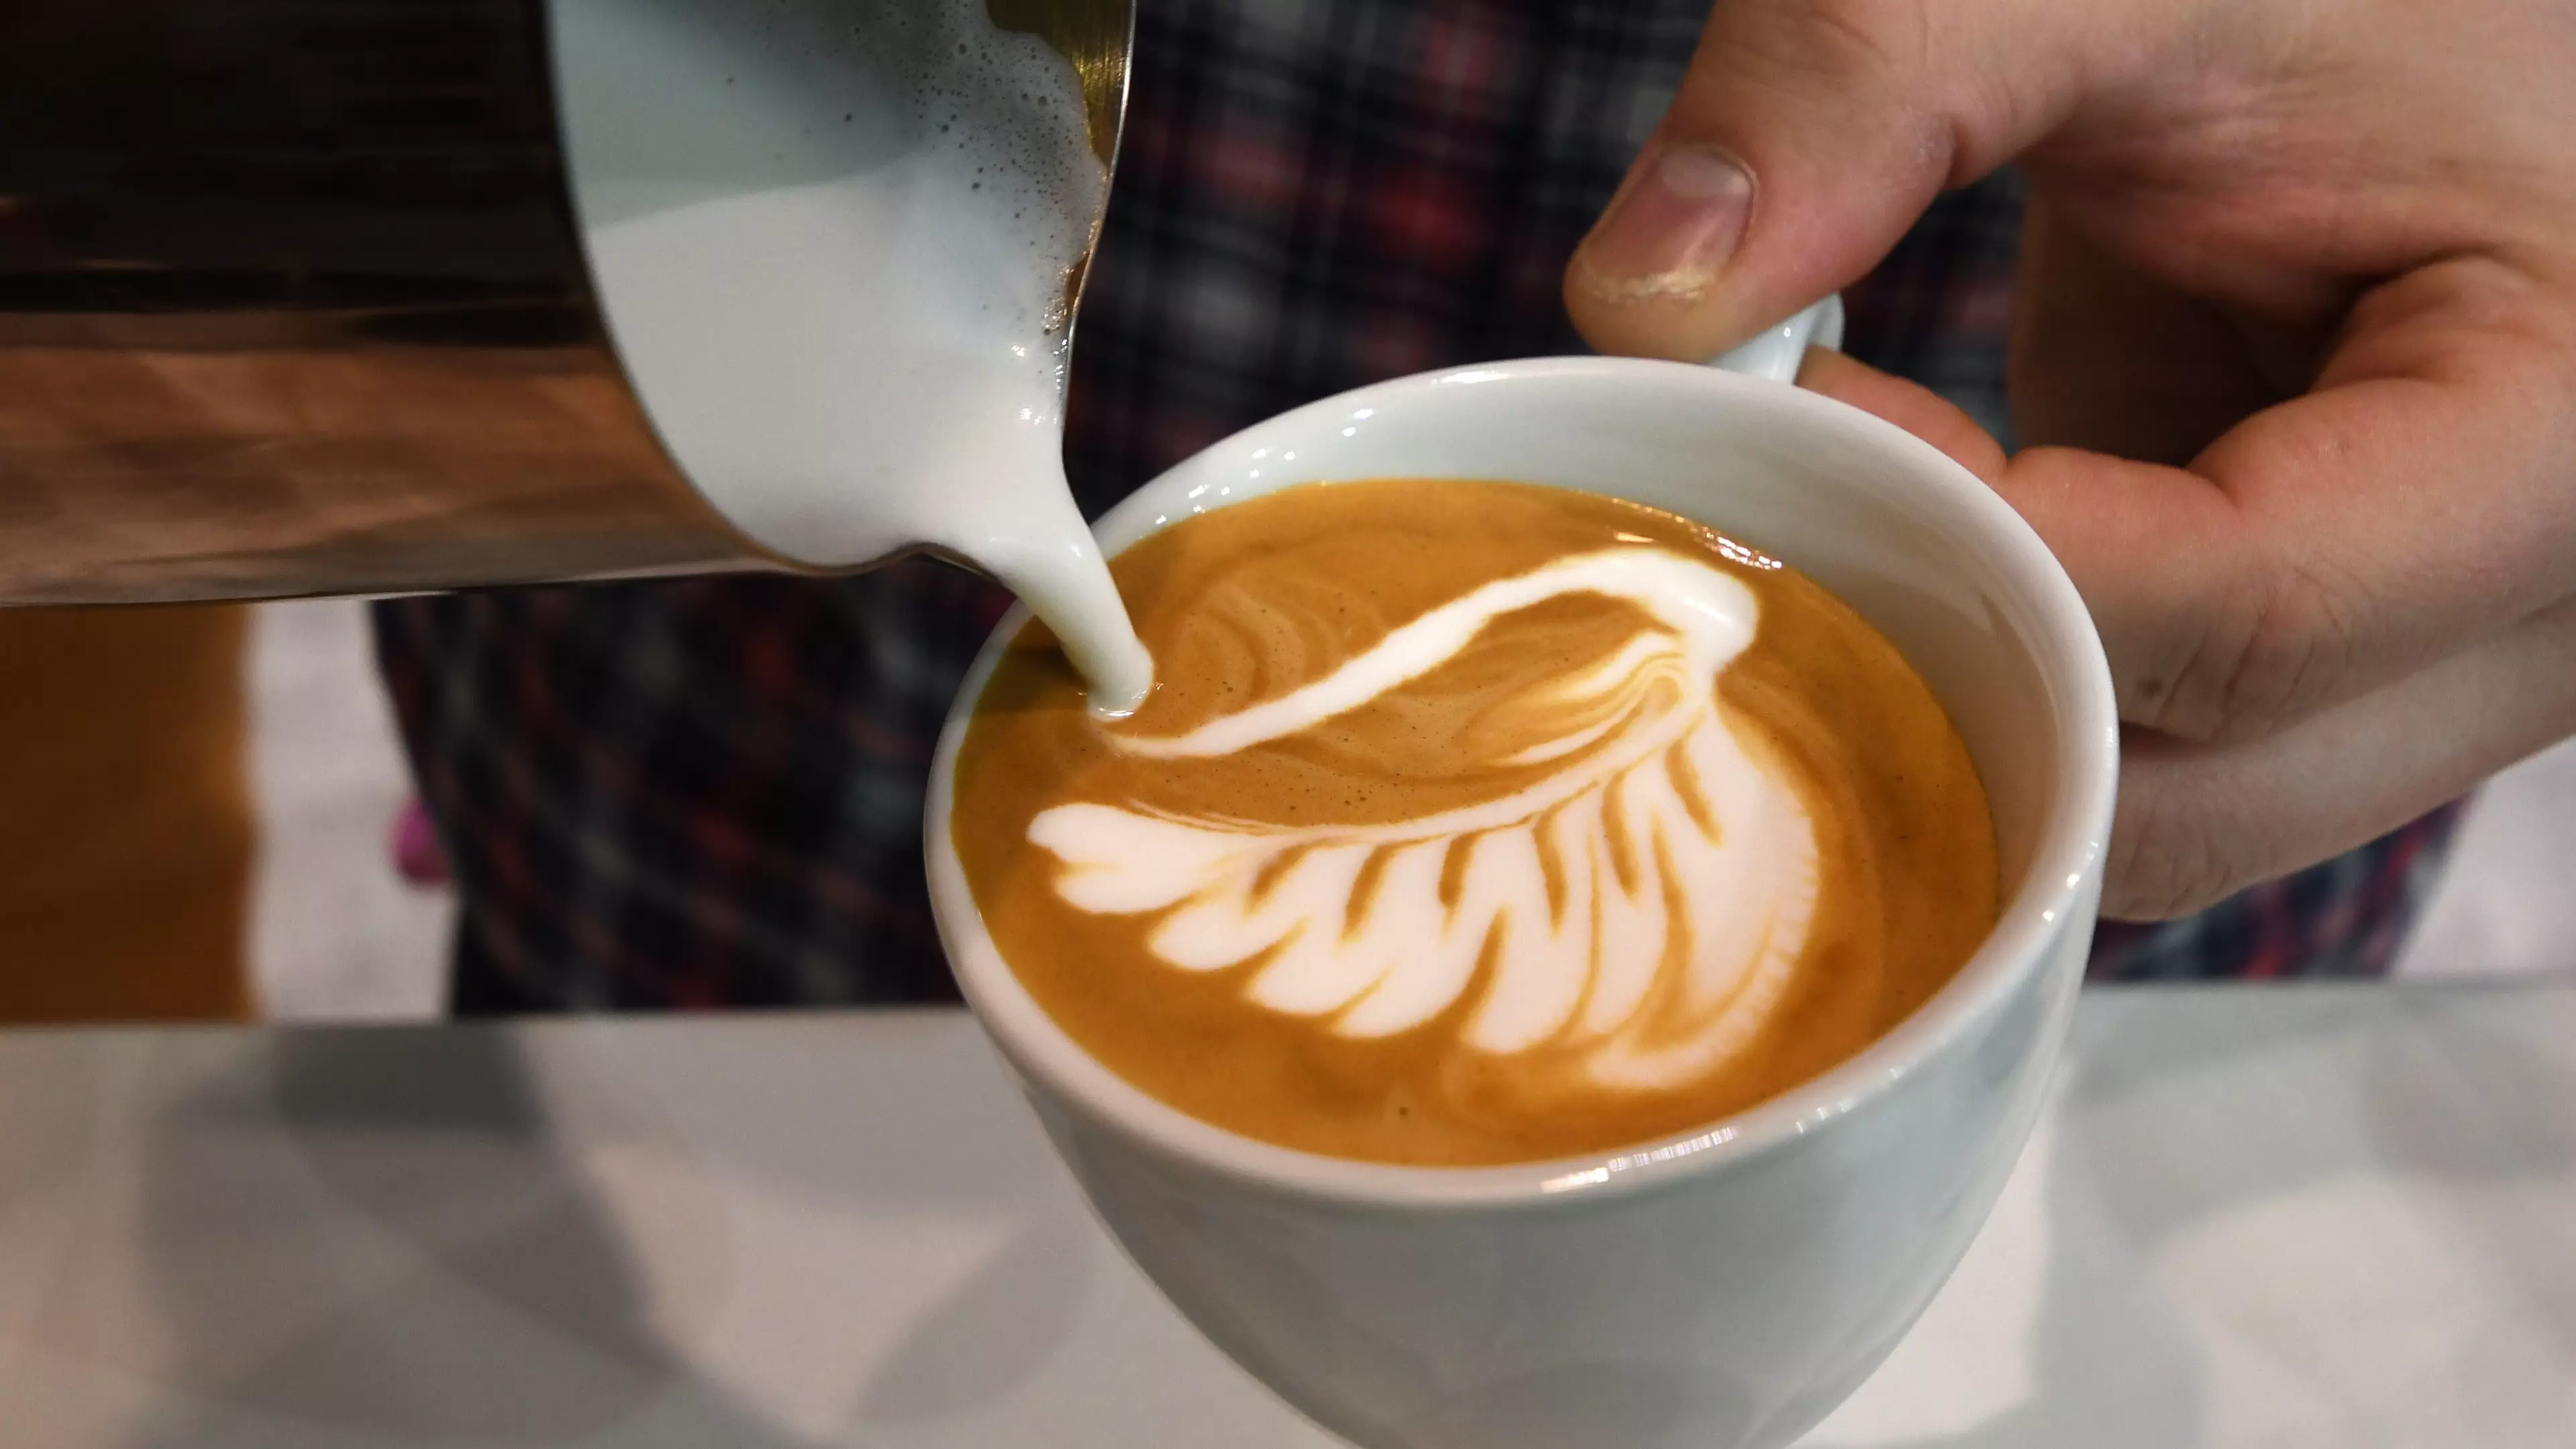 Brisbane Reckons It Will Dethrone Melbourne As The Coffee Capital Of Australia